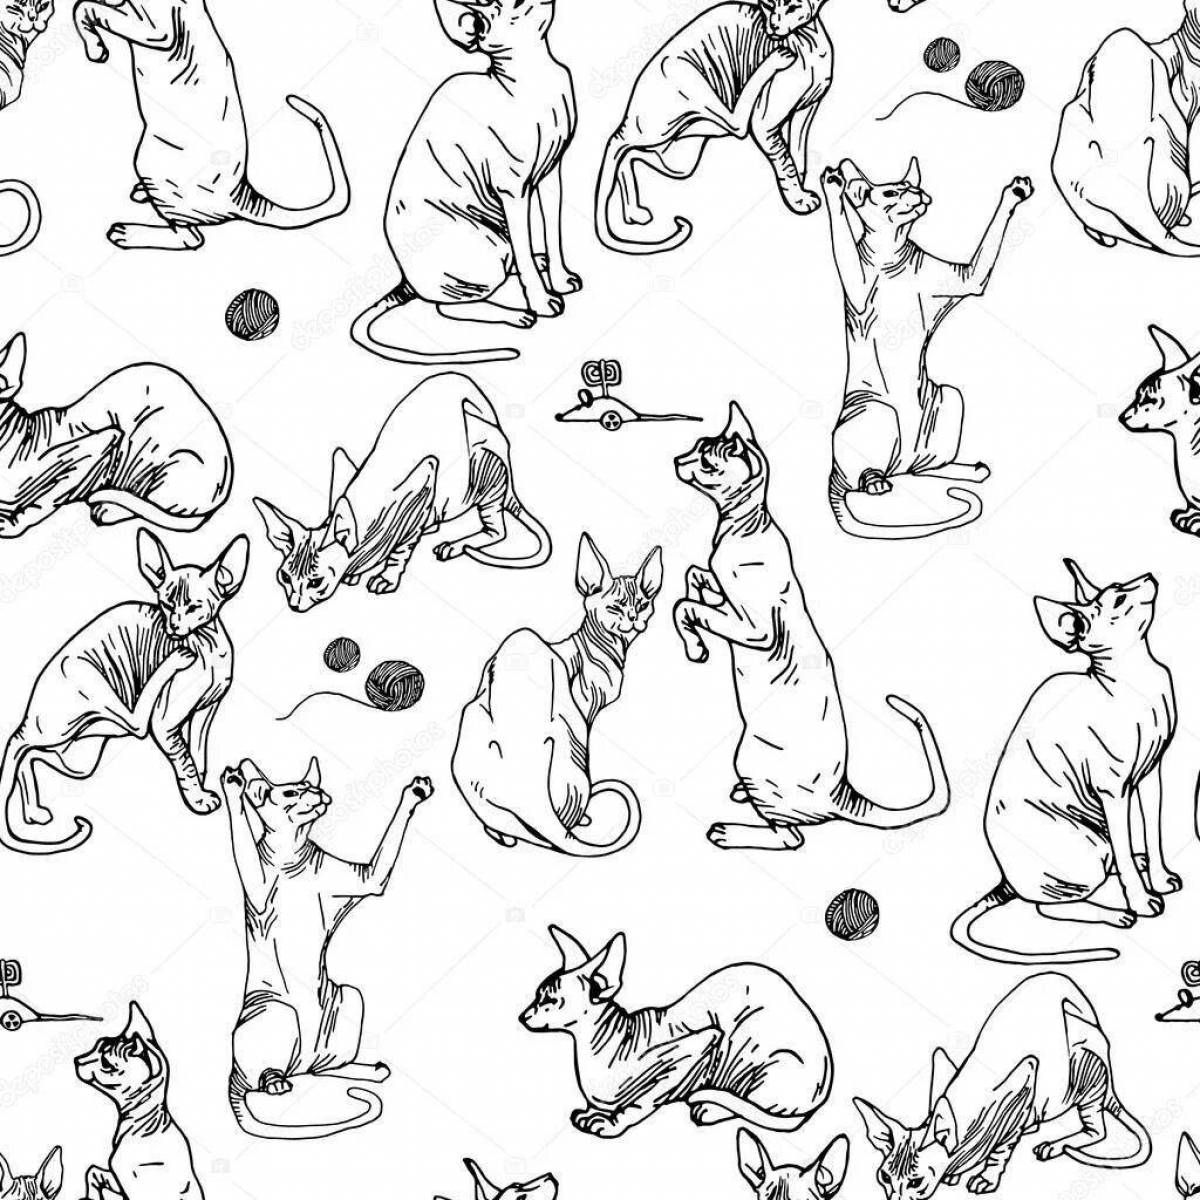 Cats for coloring content